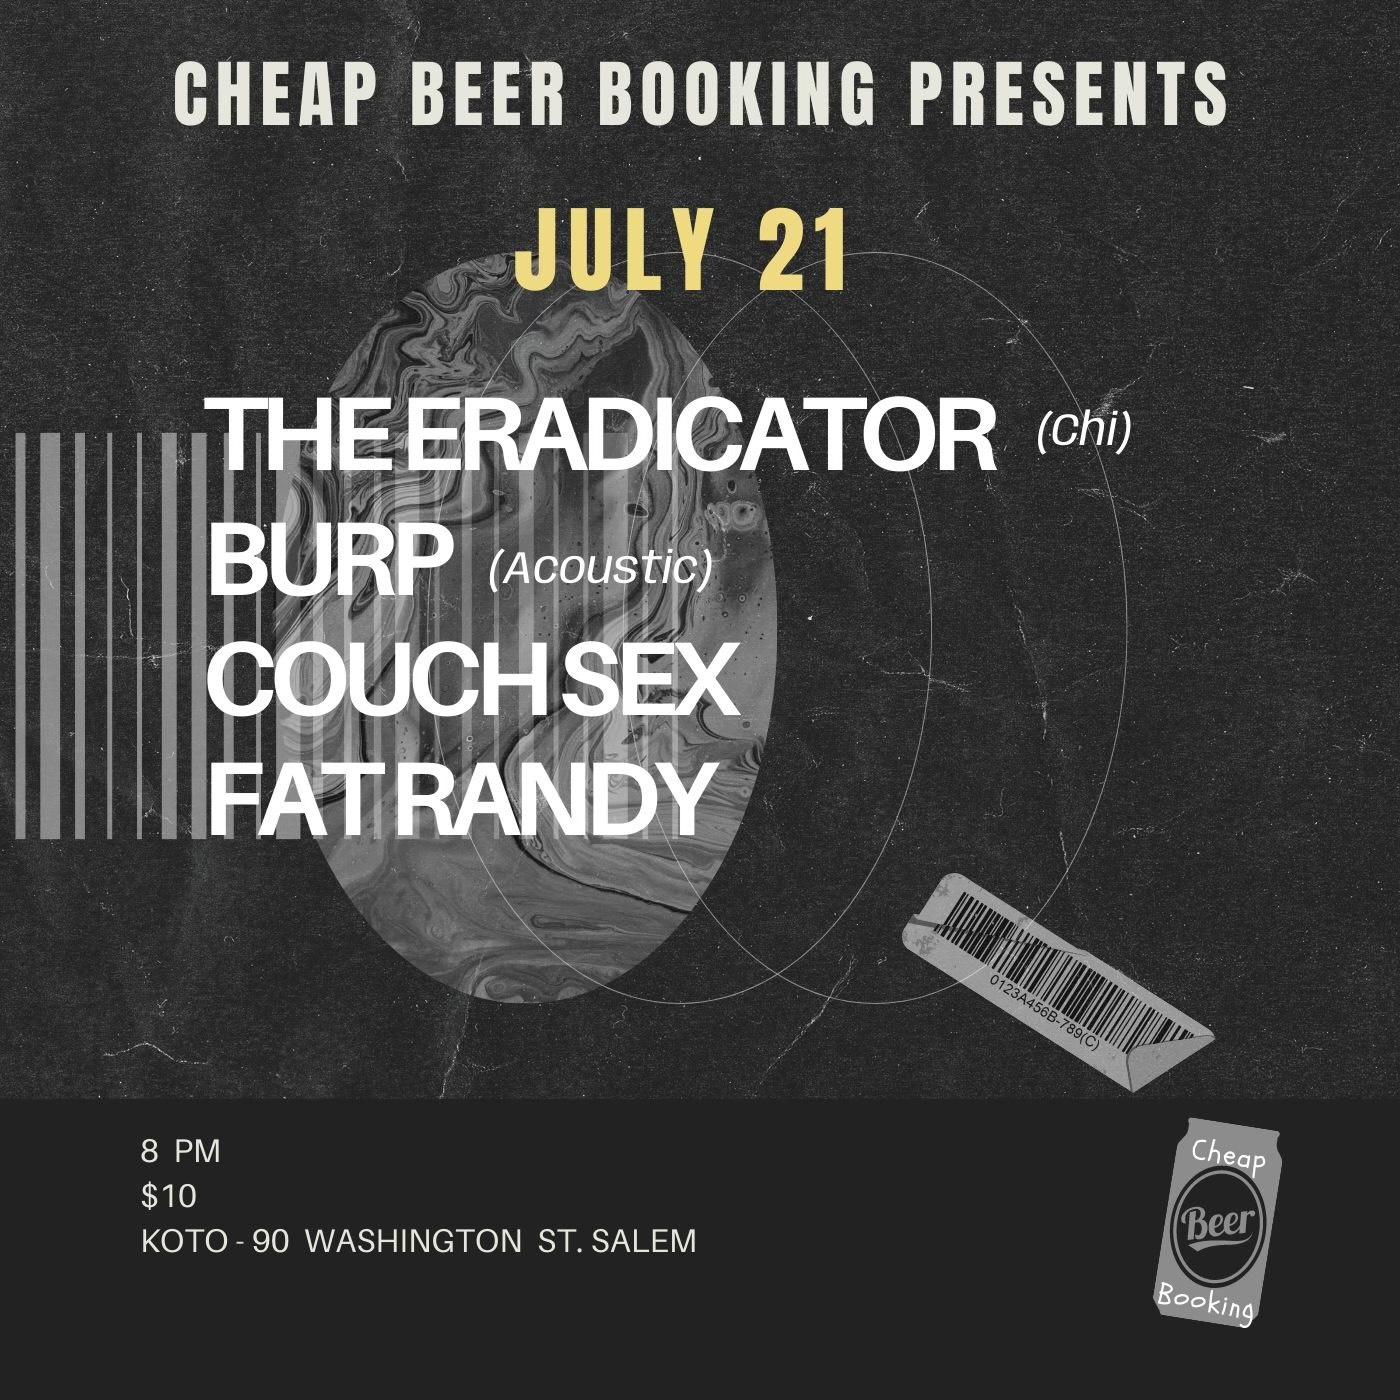 cheap beer booking presents the fractator, burp, couch sex, sex and fanny.